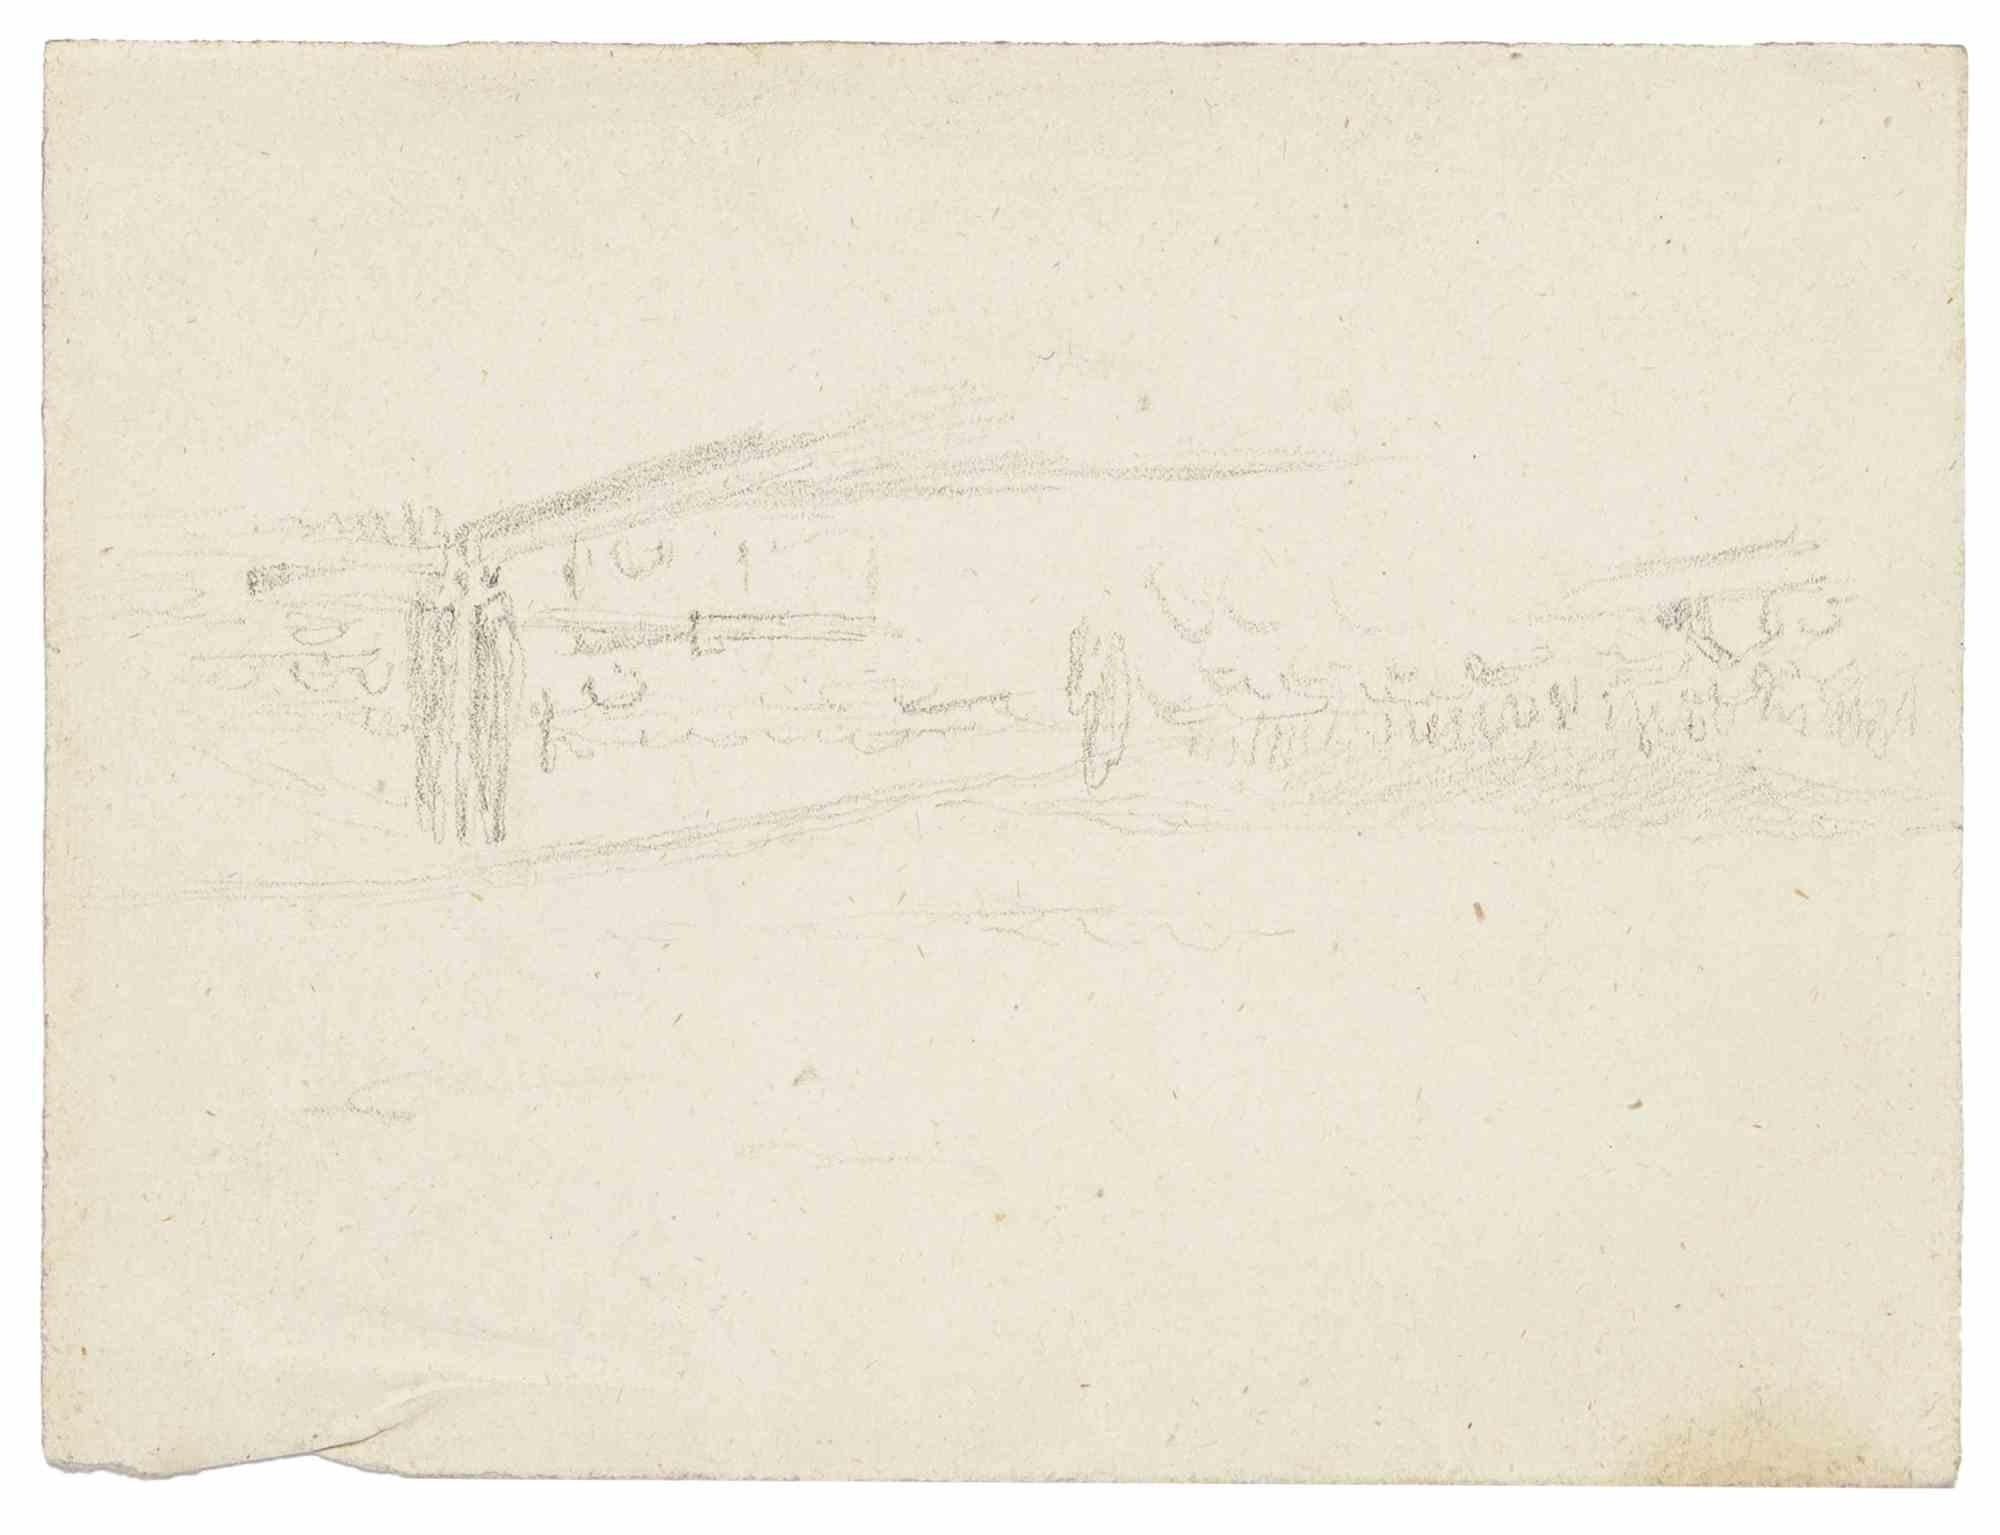 Unknown Figurative Art - Landscape - Original Drawing - Early 20th Century